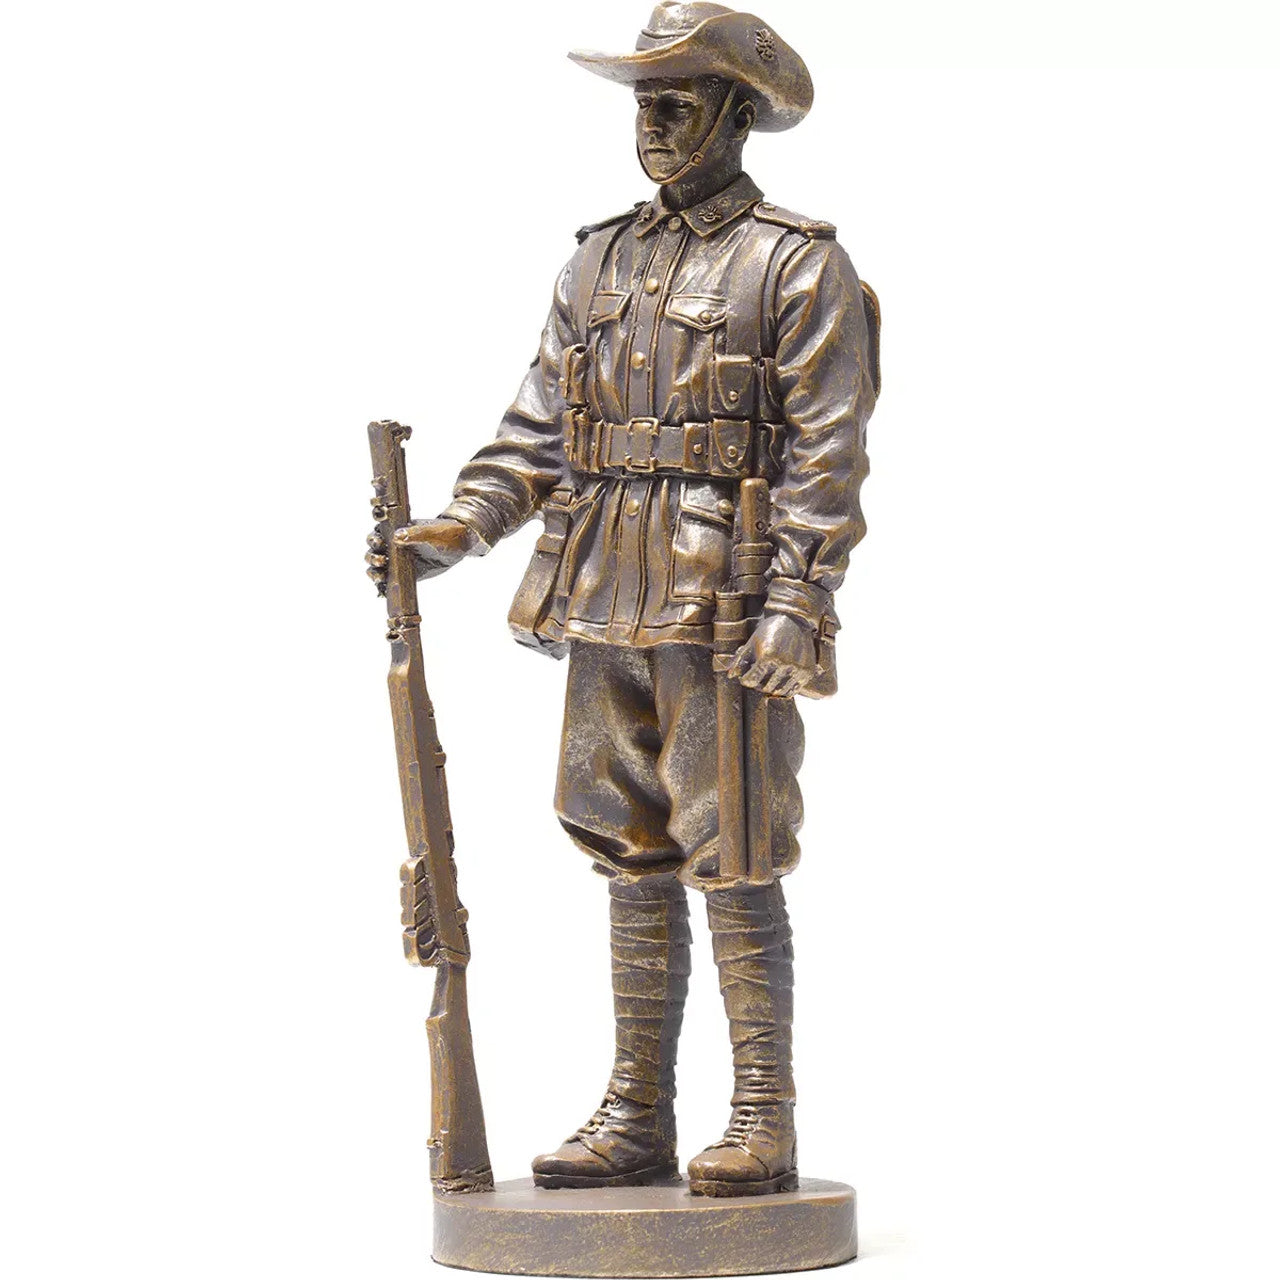 Own the sensational collector's edition of our fantastic Miniature AIF Digger figurine. Only 75 of the Miniature AIF Digger figurines feature this unique gold finish, creating the Collector's Gold Edition. www.defenceqstore.com.au